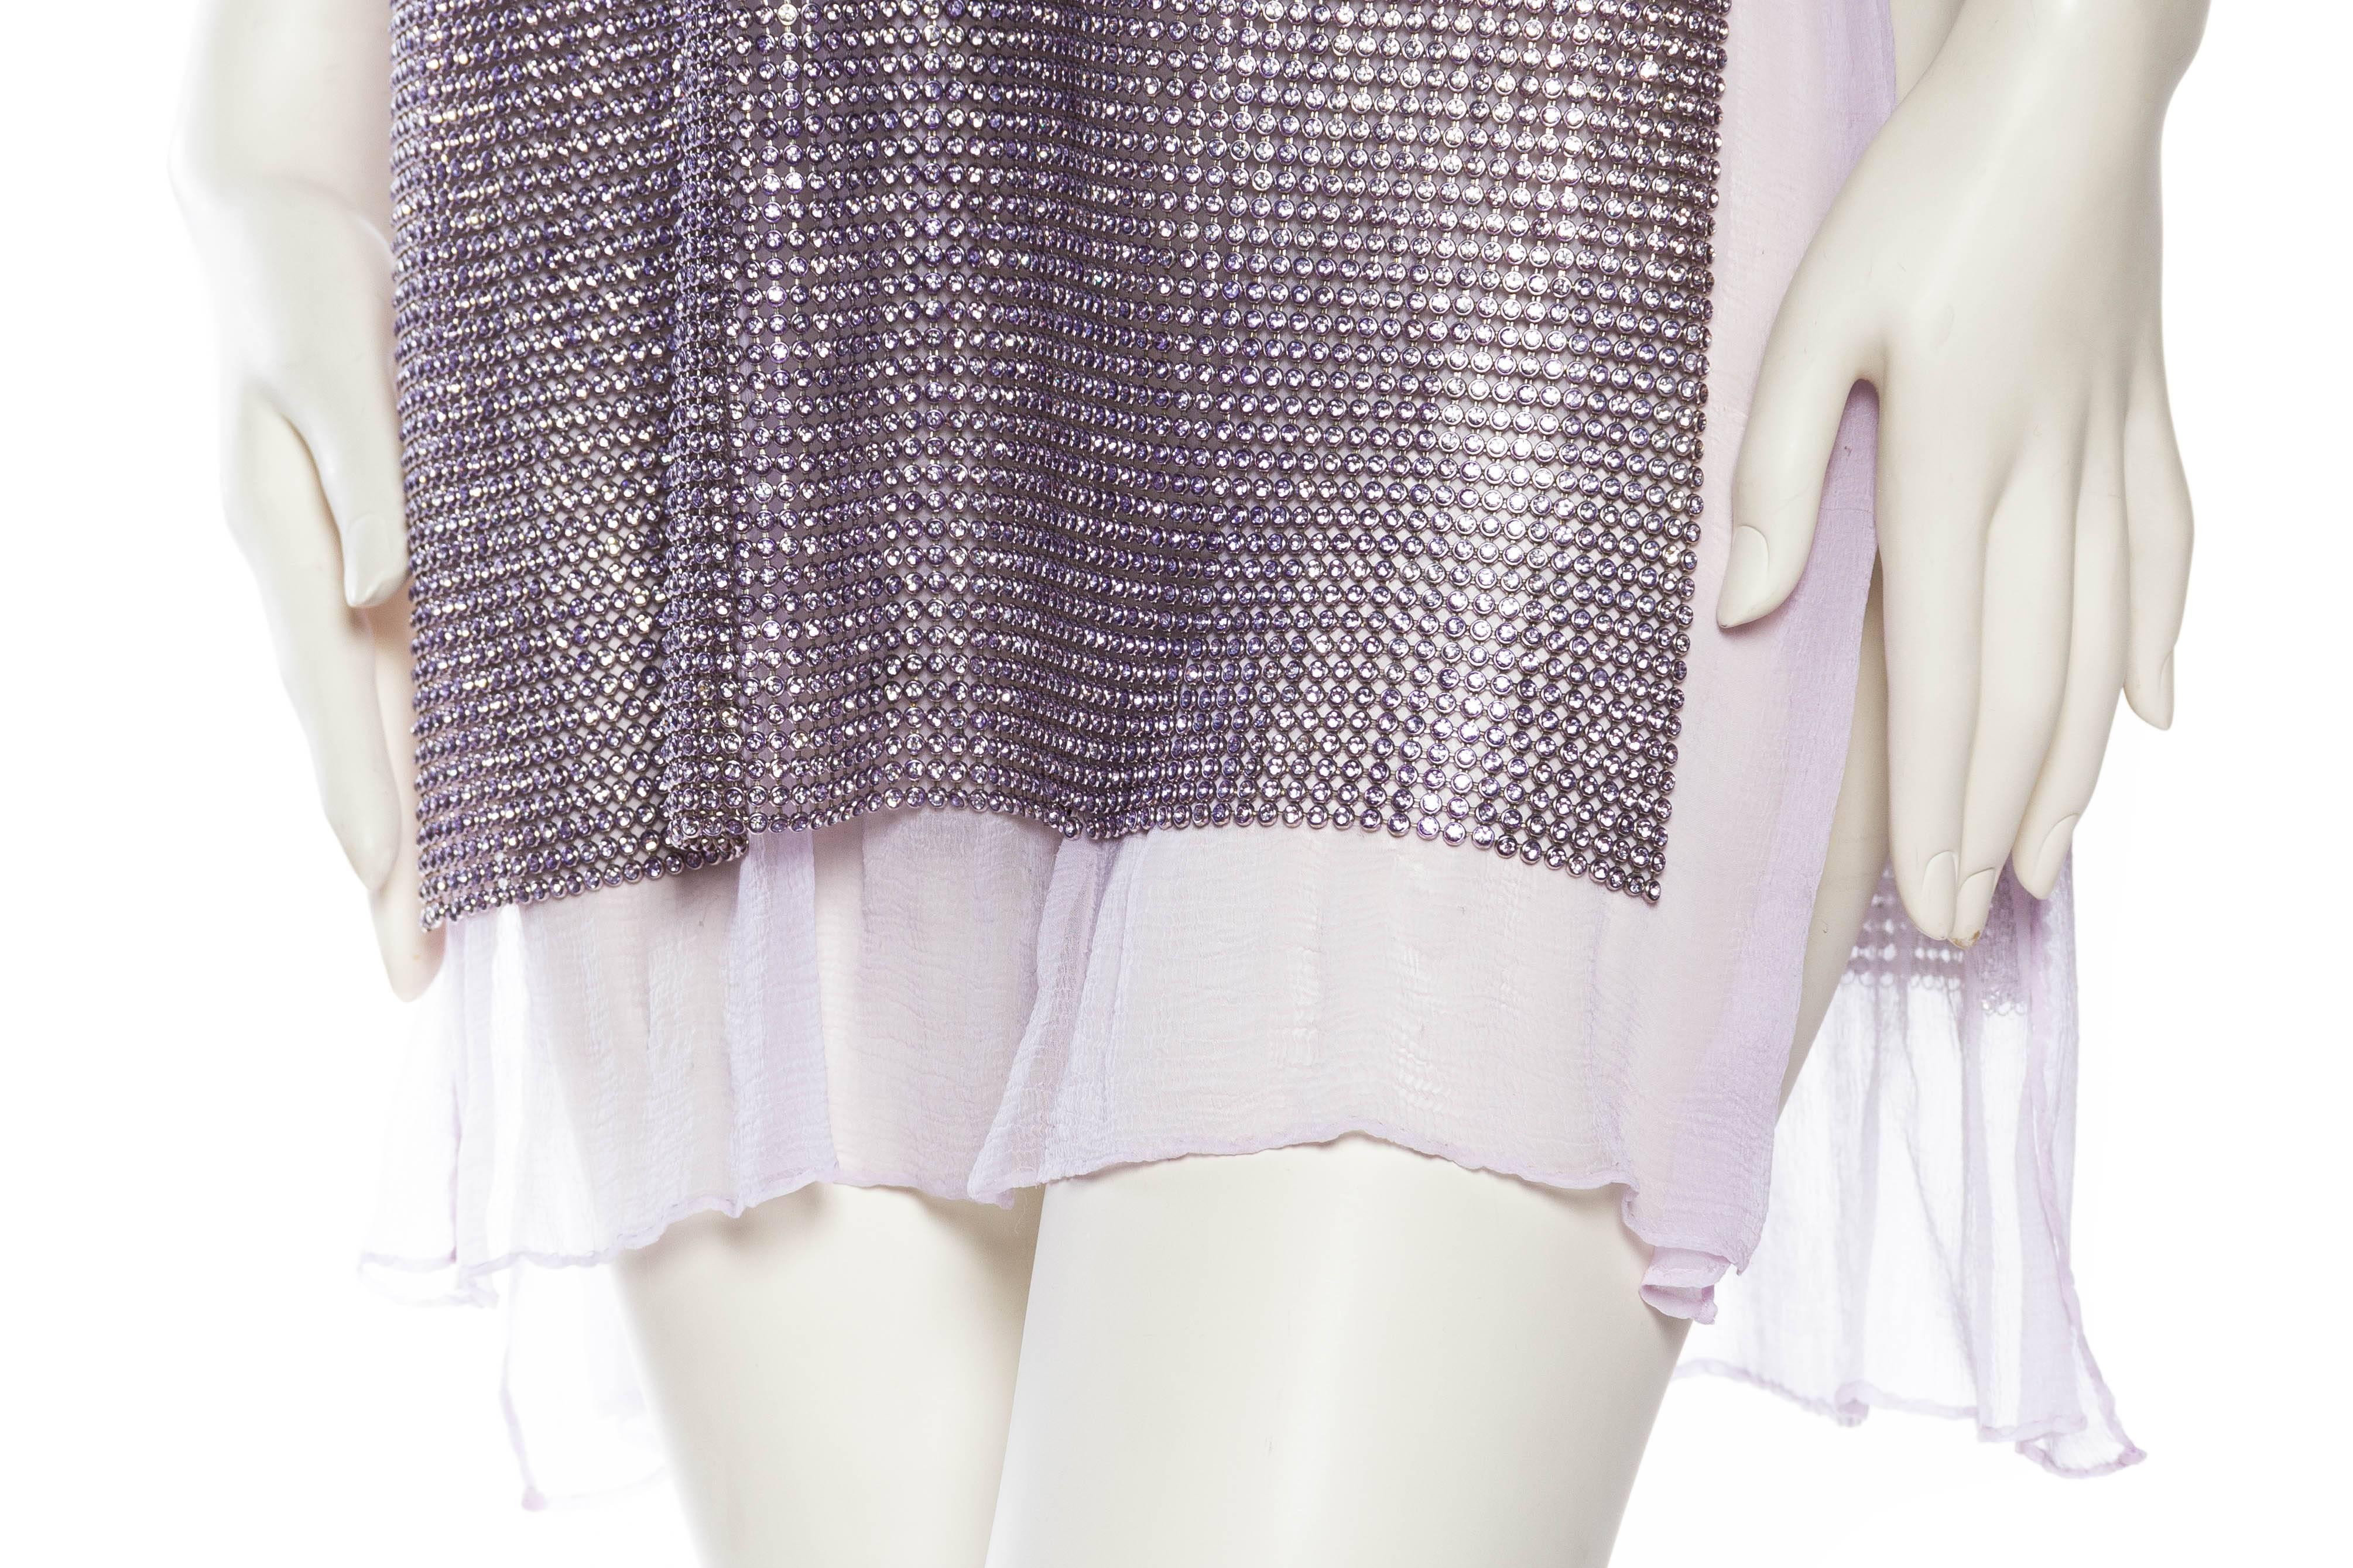 1990S GIANNI VERSACE Lilac Silk Chiffon & Crystal Metal Mesh Cocktail Dress Wit In Excellent Condition For Sale In New York, NY